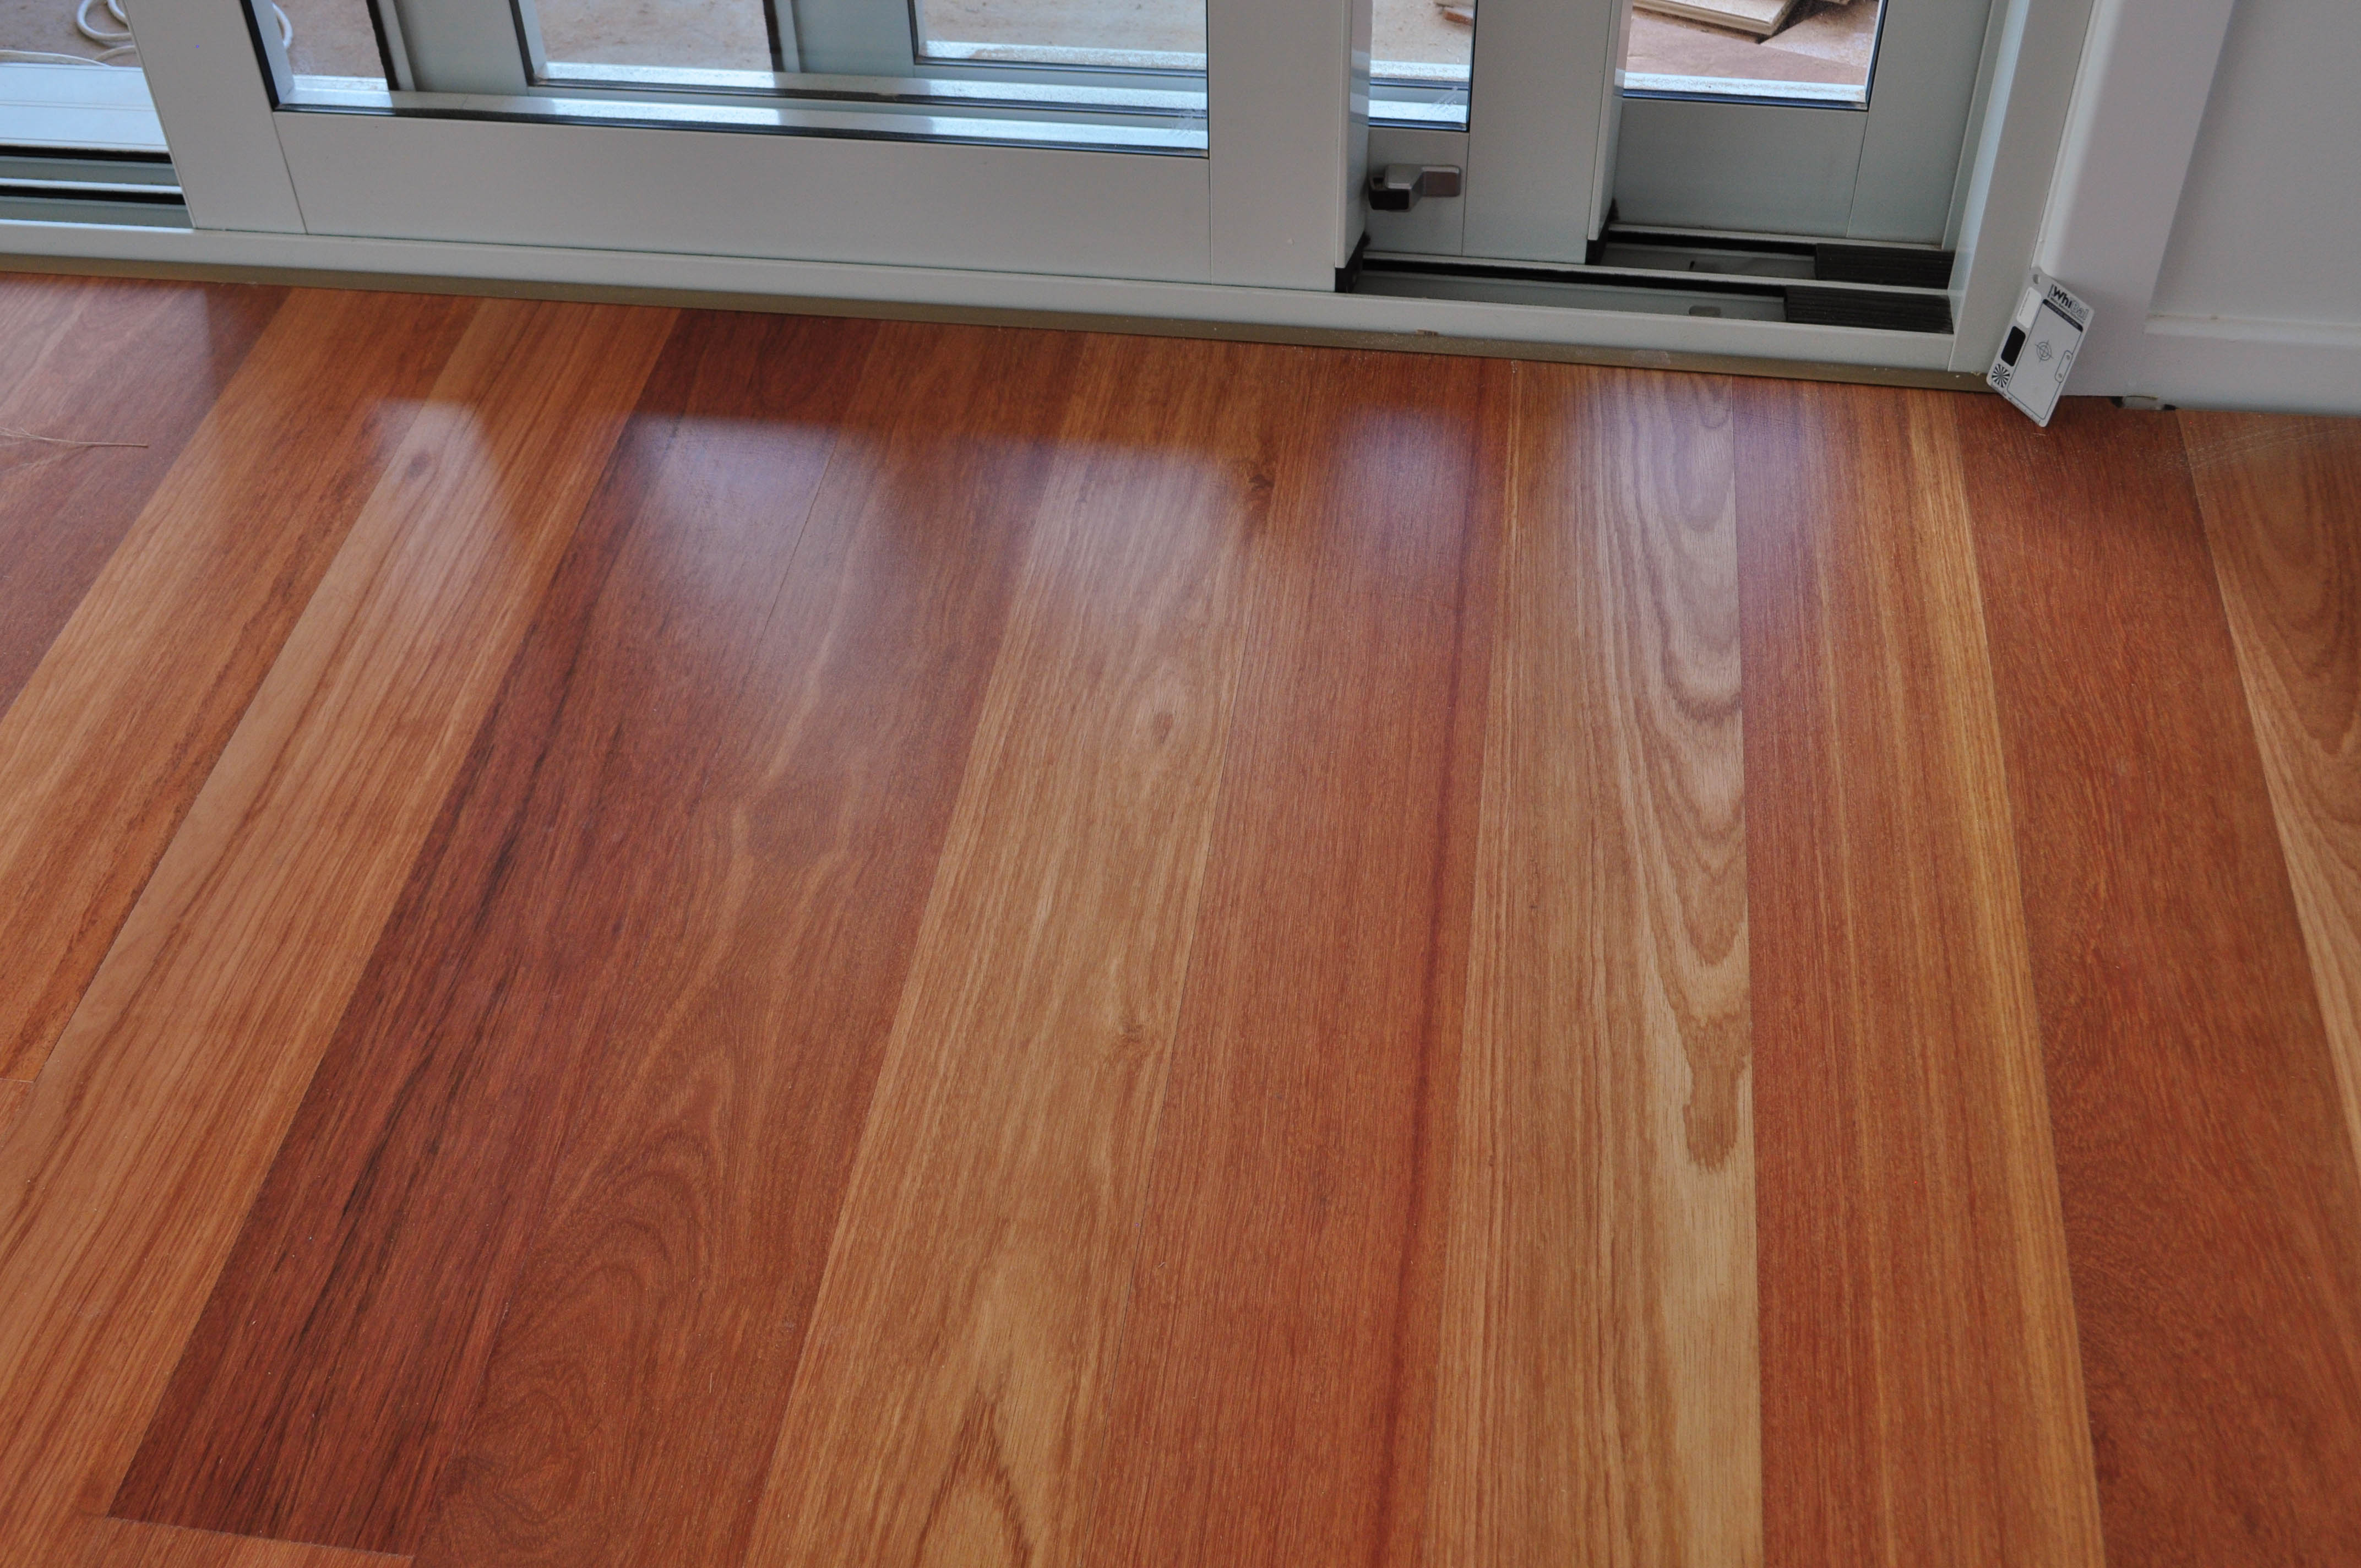 showing a room with a completed installation of a hardwood, engineered, floating, laminate, timber floor. The species of wood is kempes 
	  which is of an orange colour.